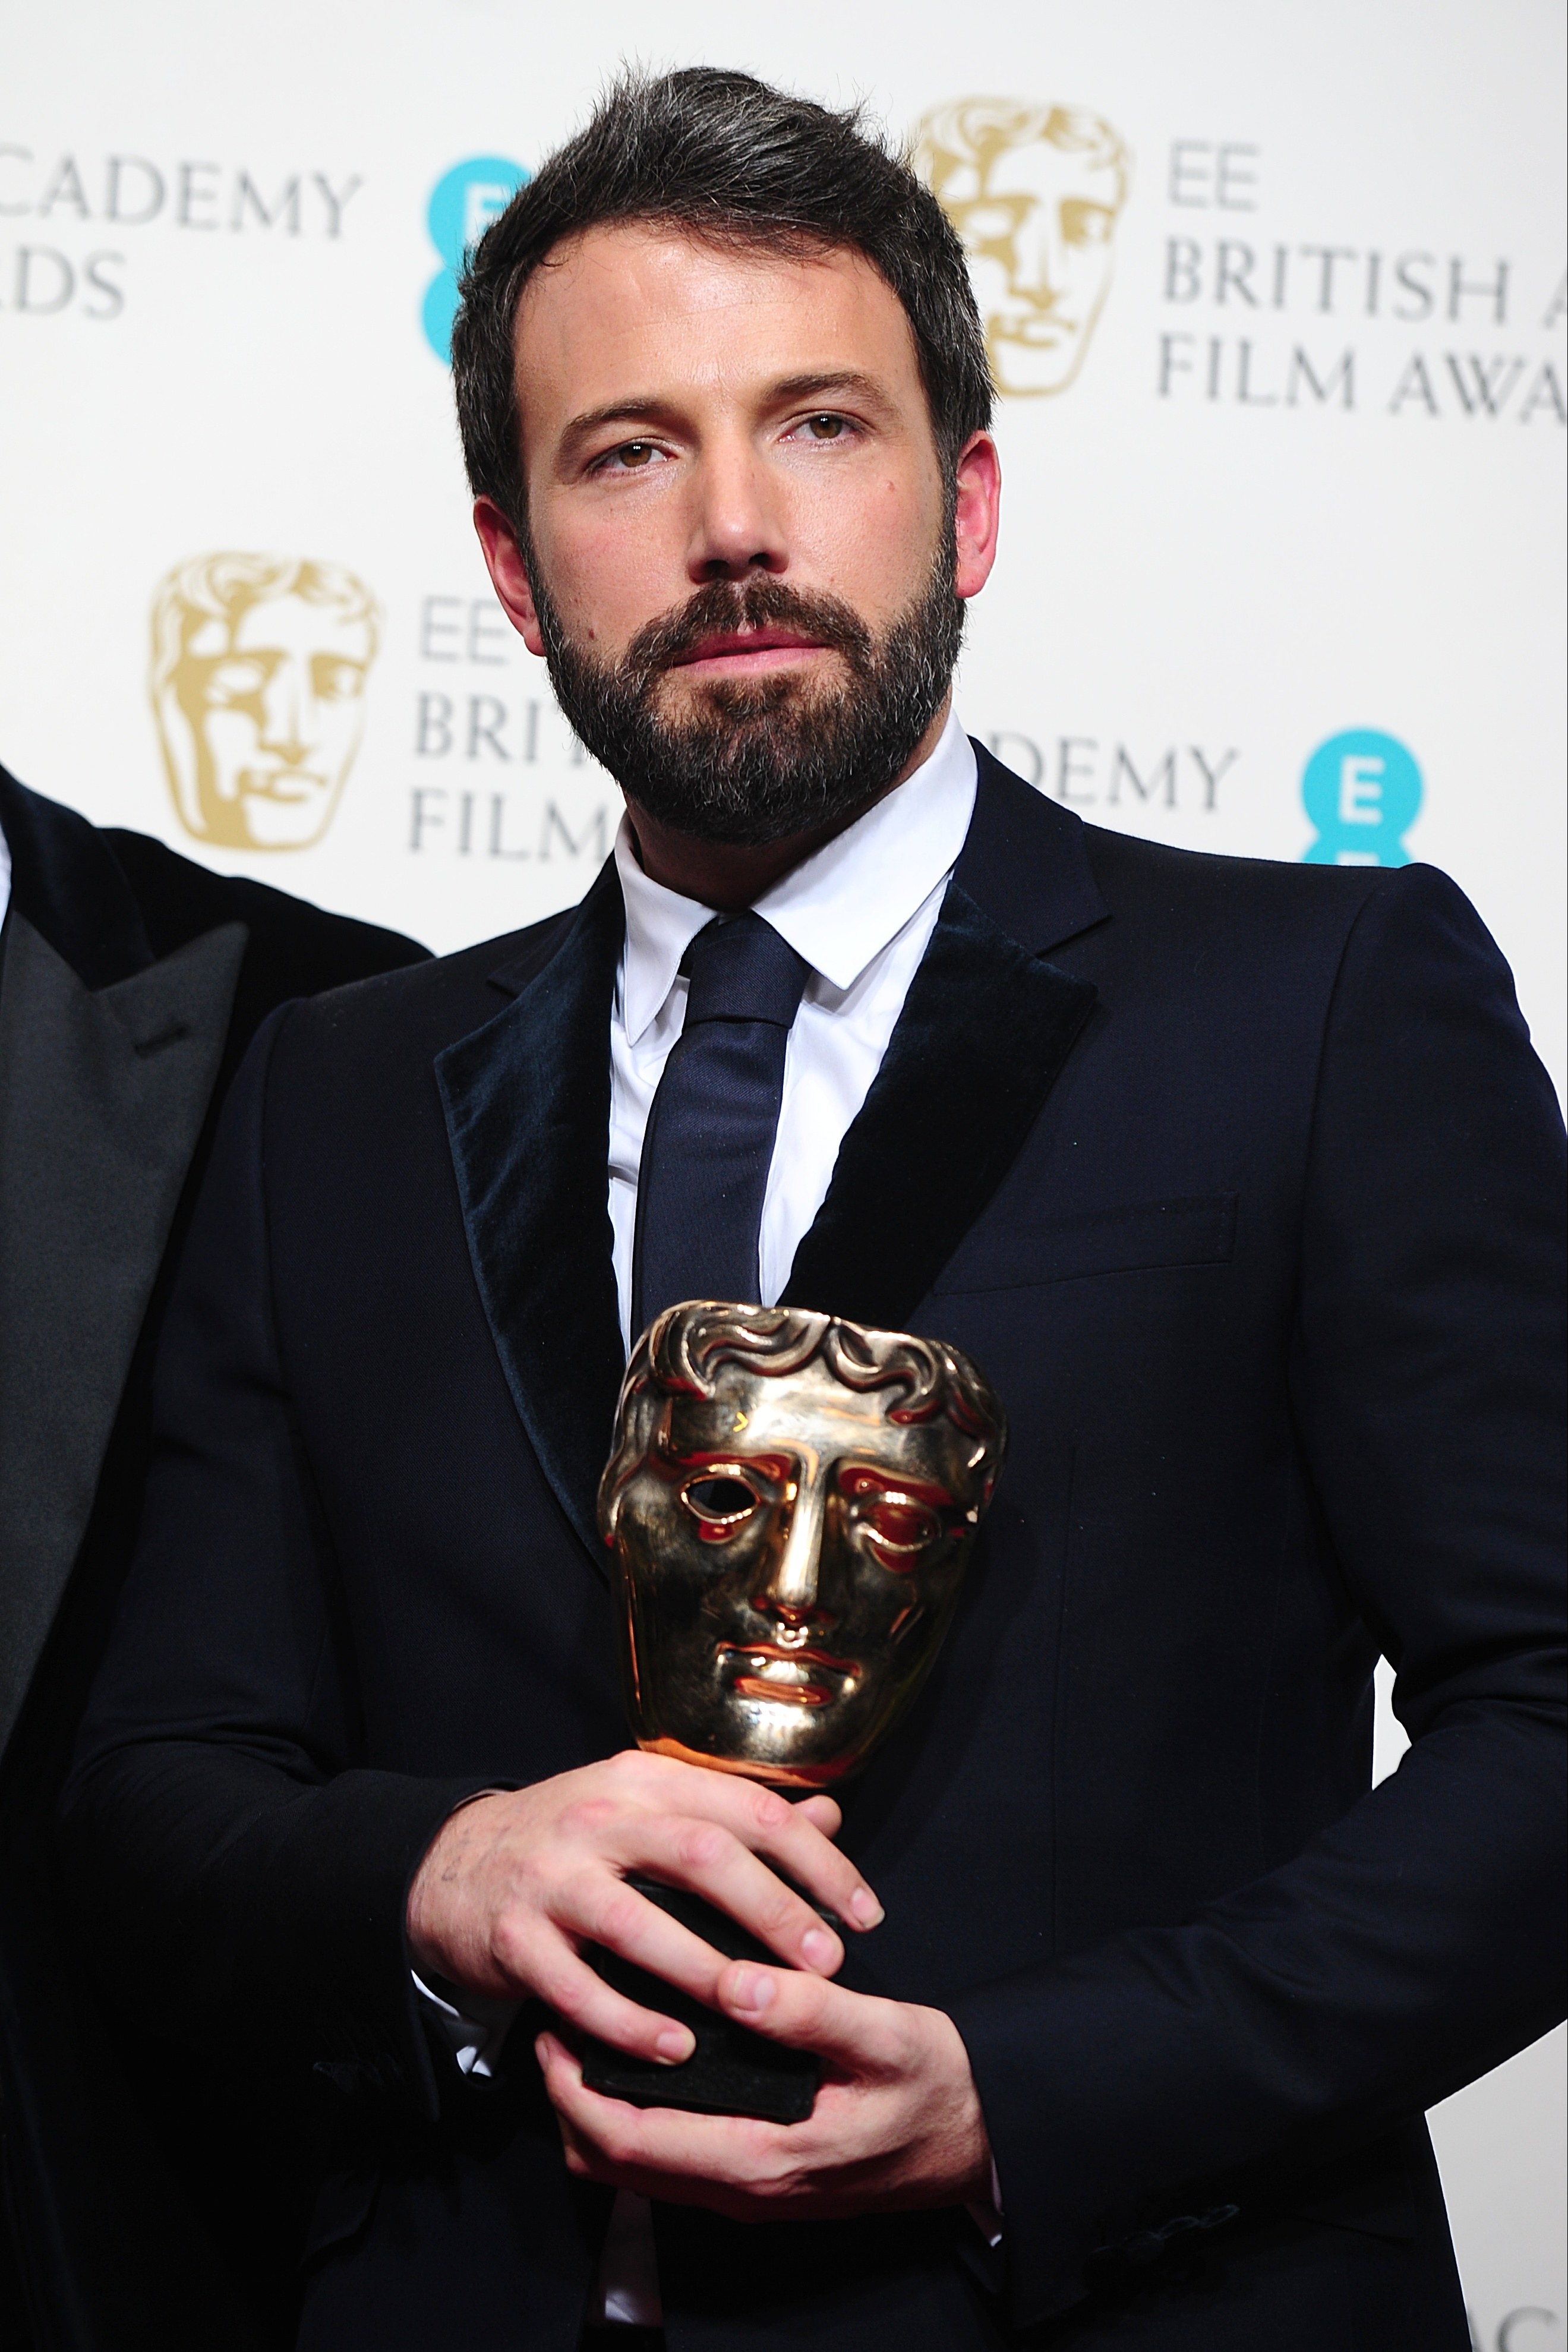 Ben Affleck with the award for Best Film for &quot;Argo&quot; in the press room at the 2013 British Academy Film Awards